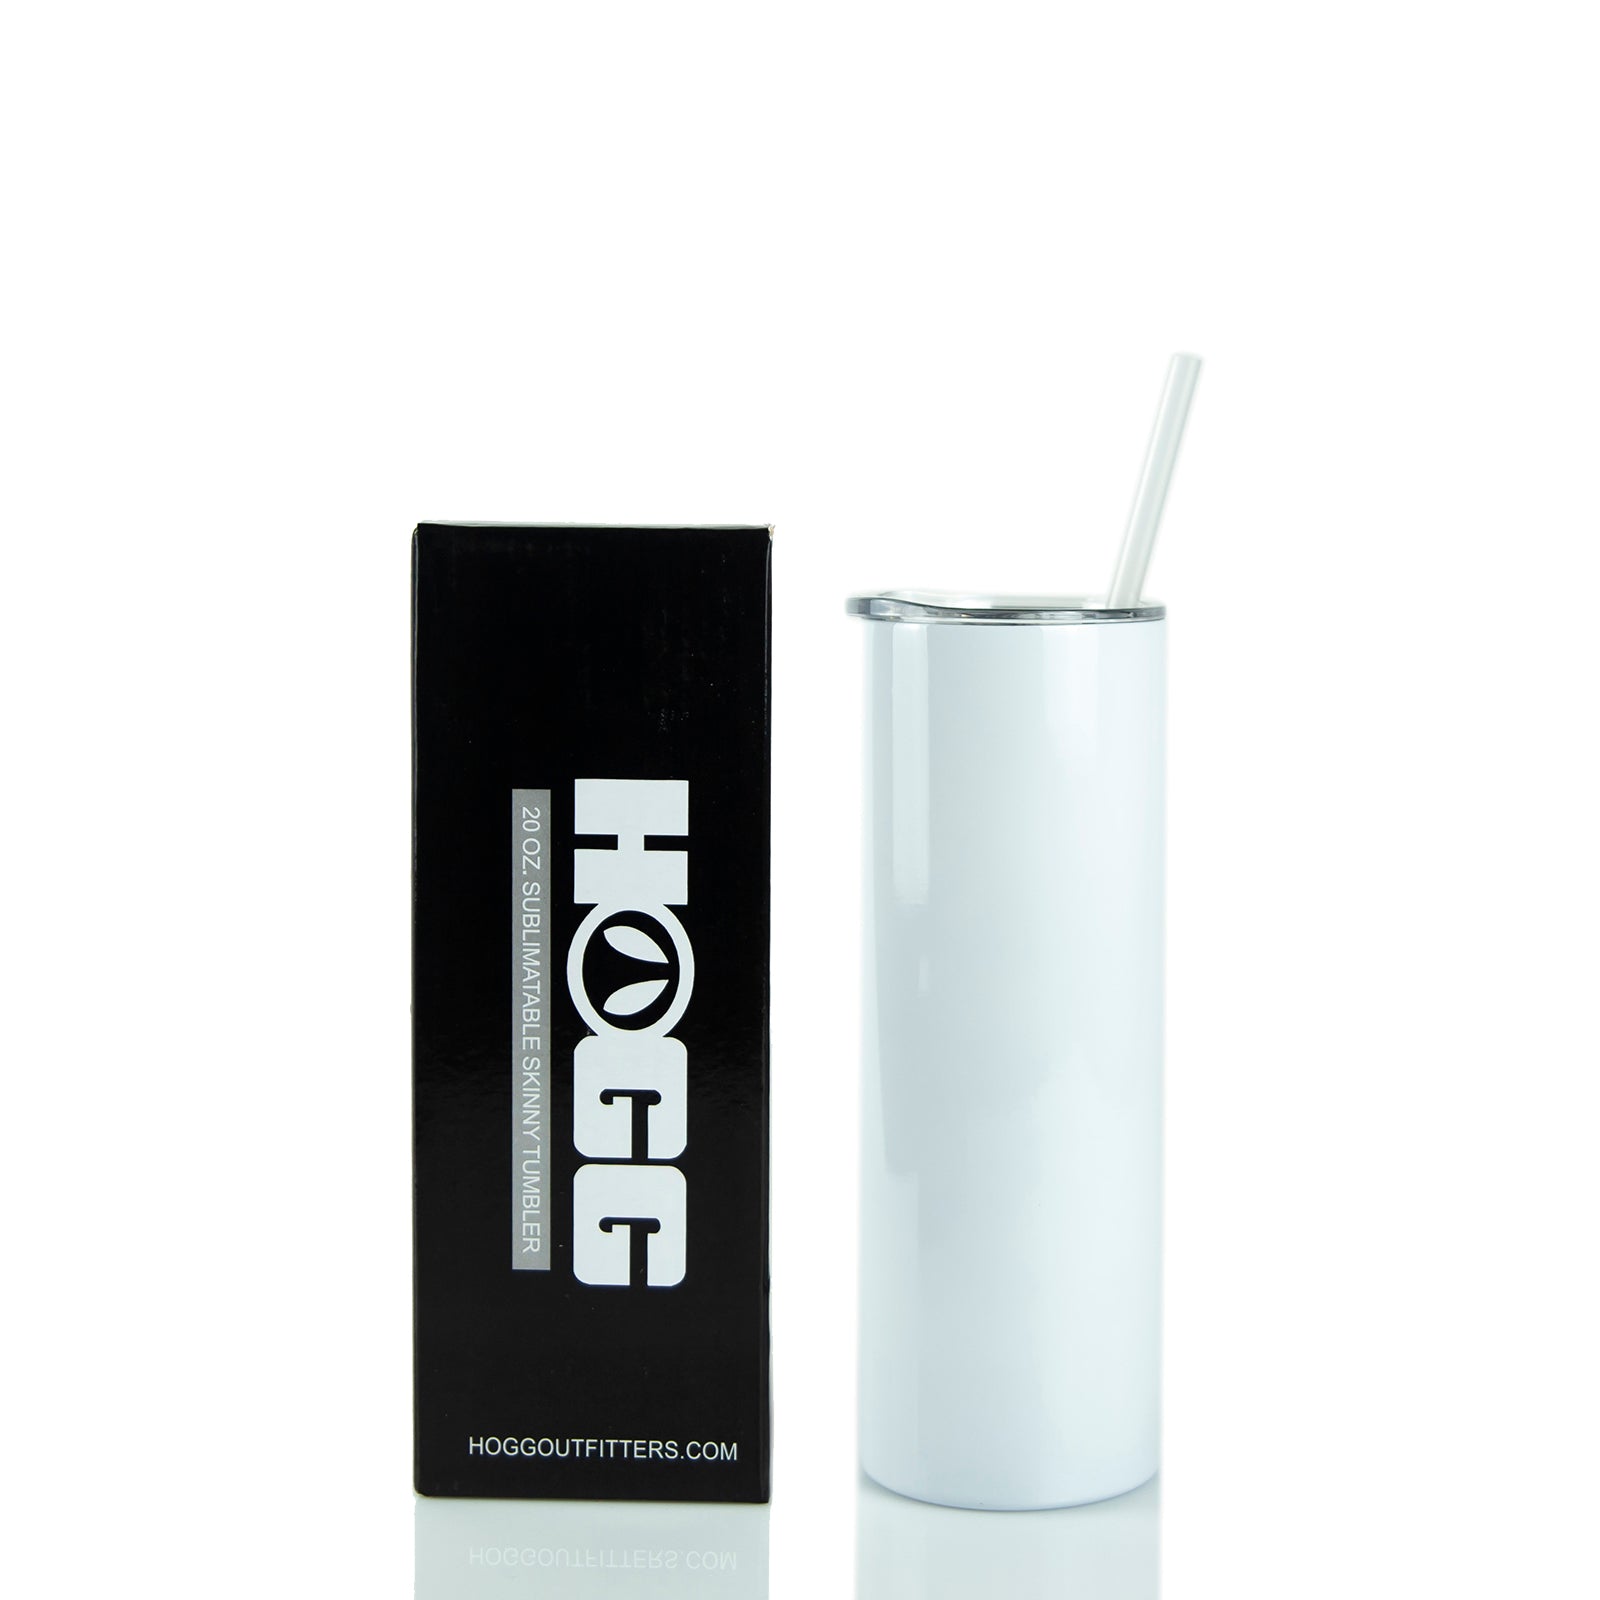 20oz Sublimation Straight Skinny With a Straw